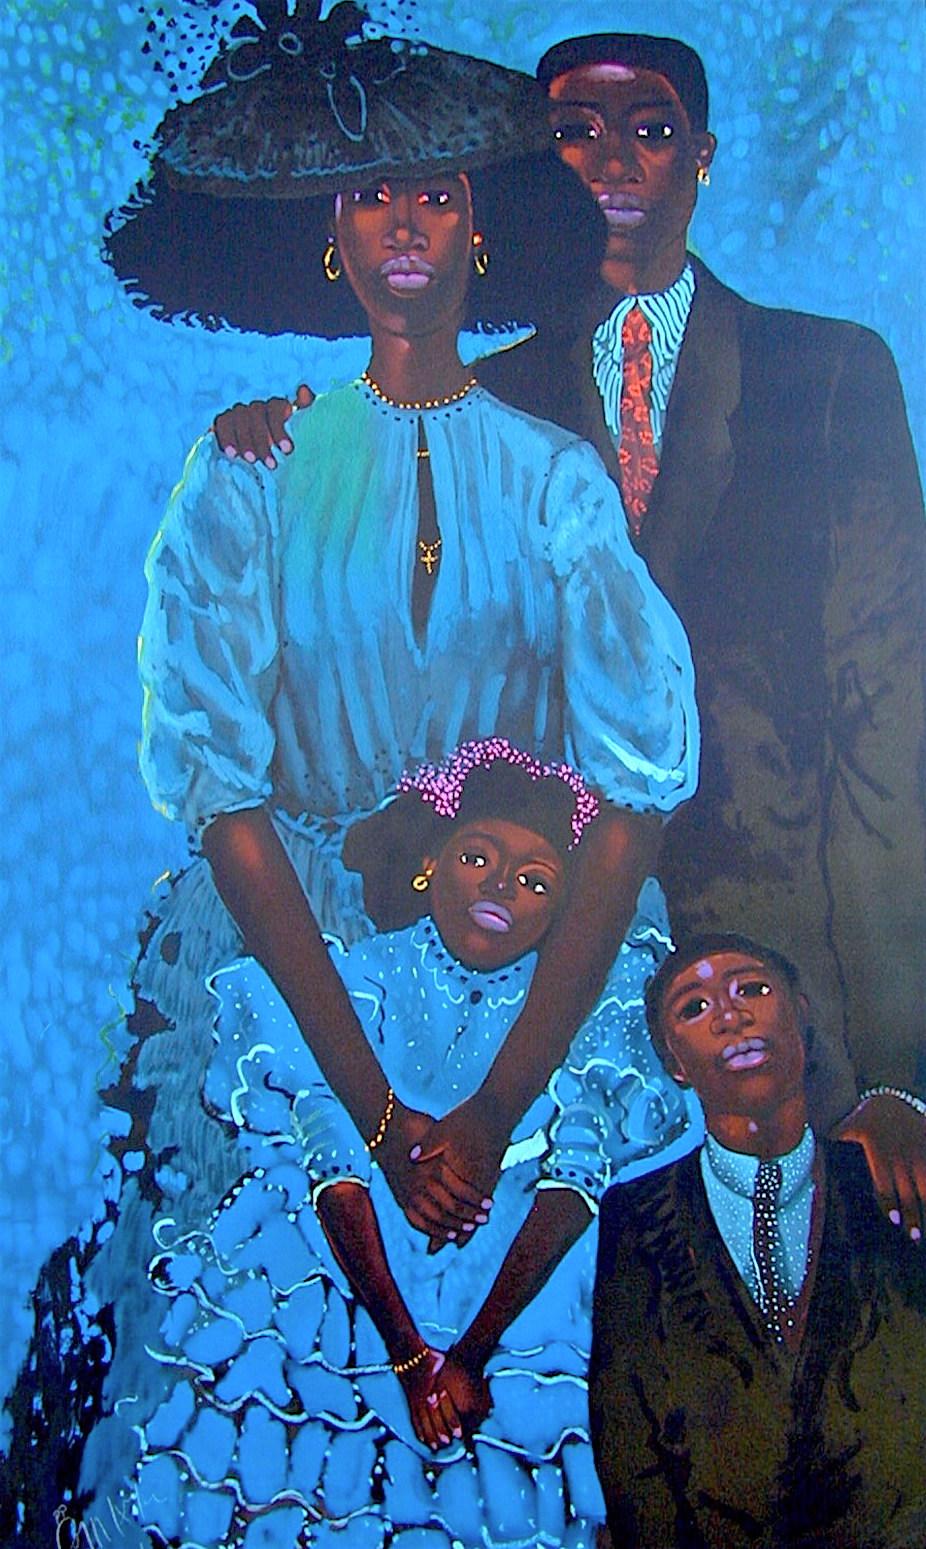 Geoffrey Holder Figurative Print - FAMILY IN BLUE Signed Original Lithograph, Formal Black Family Portrait